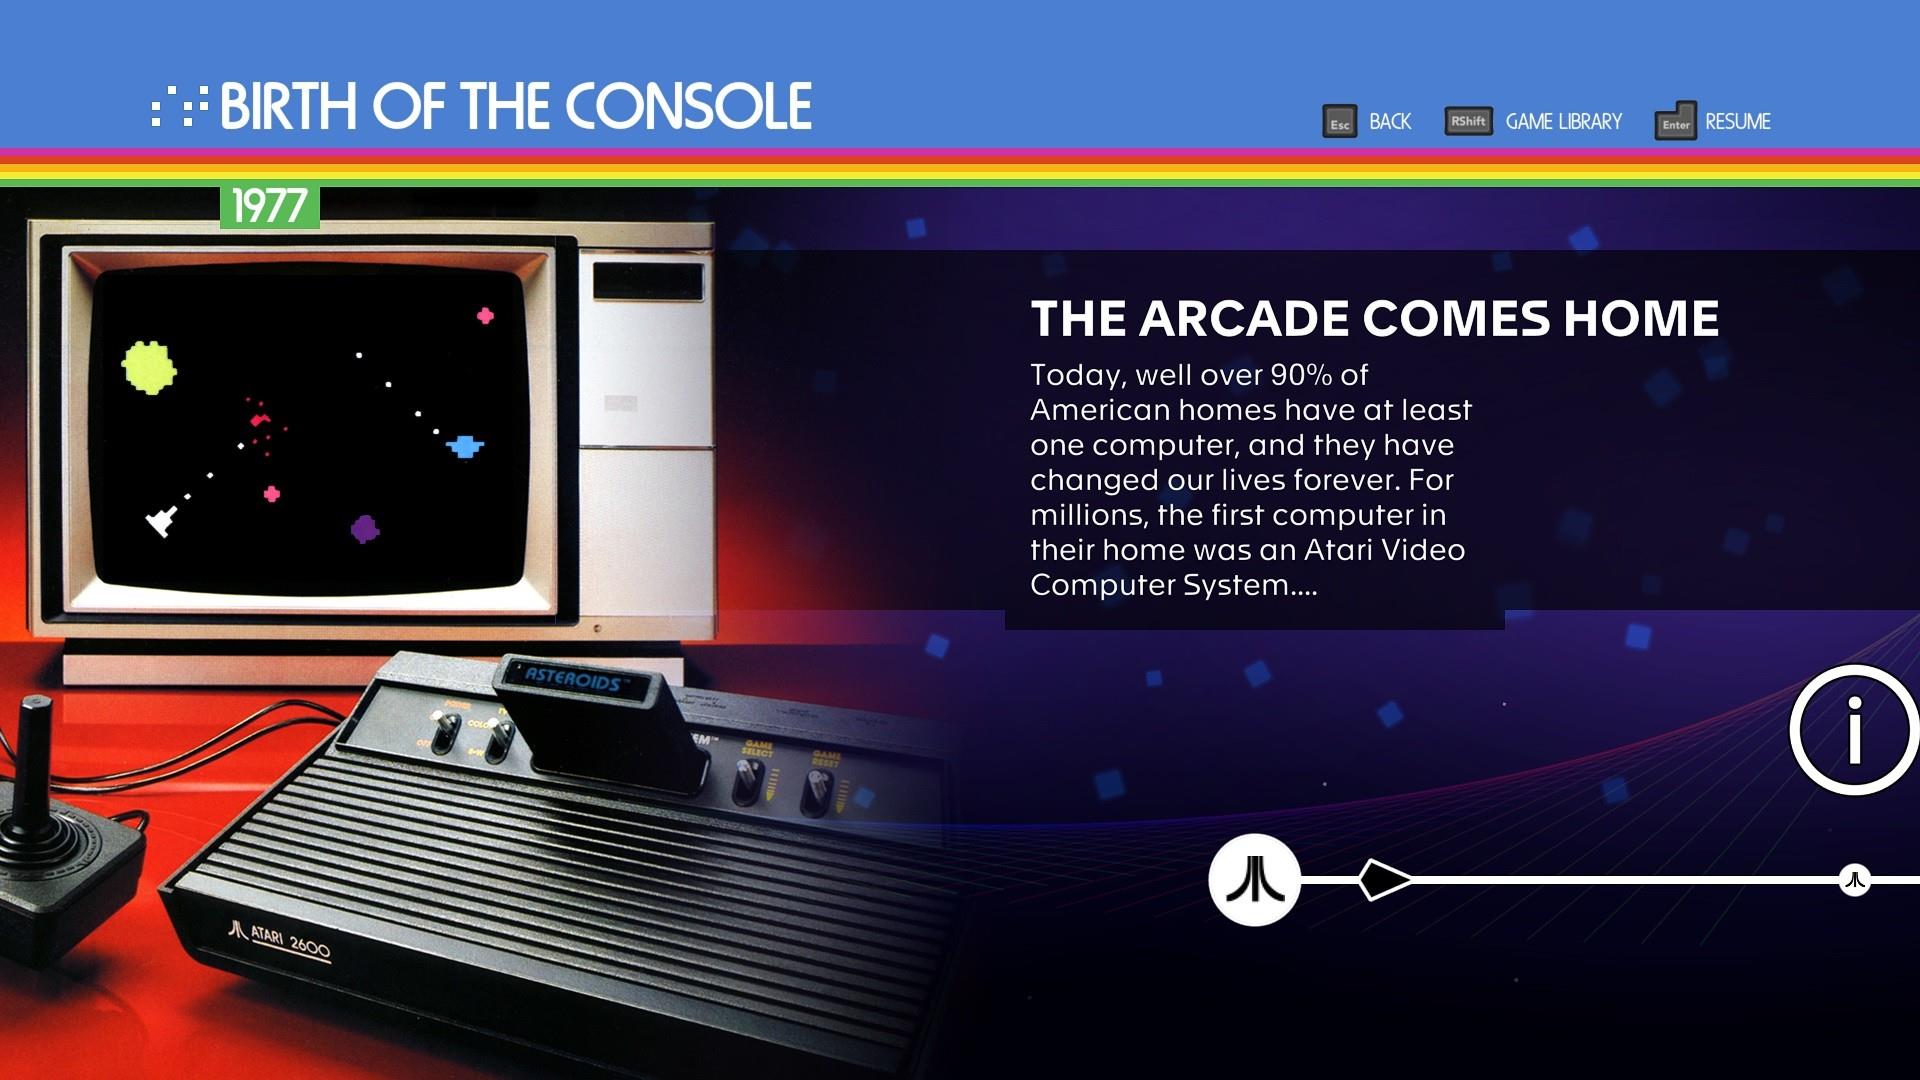 Atari is entering the handheld gaming space with this gorgeous